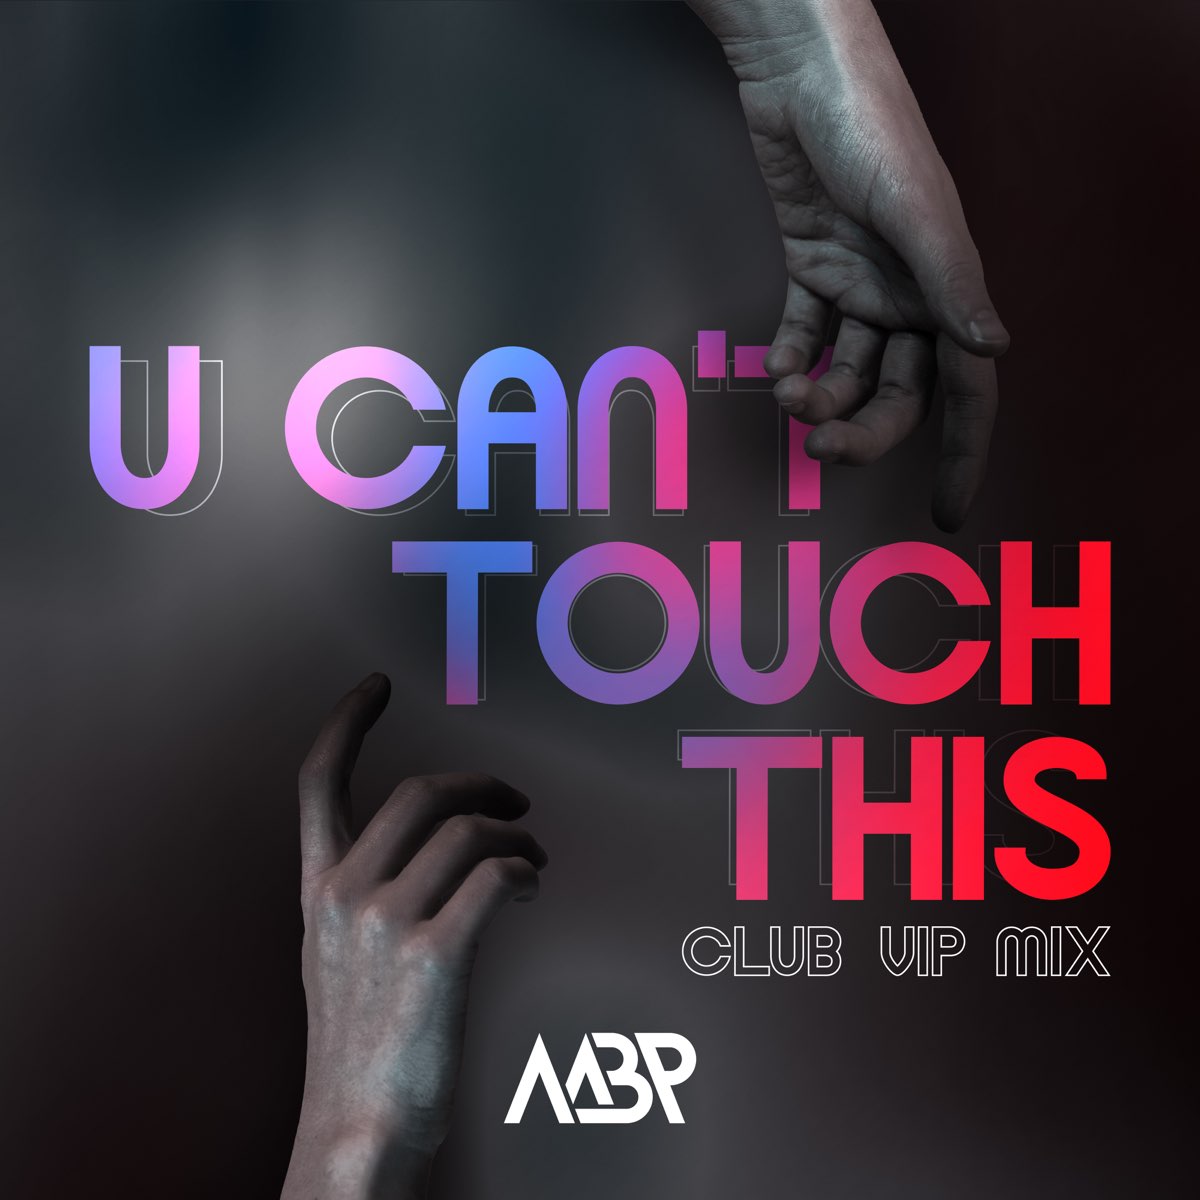 U can't Touch this текст. U can Touch this. Can't Touch this. VIP Mix.